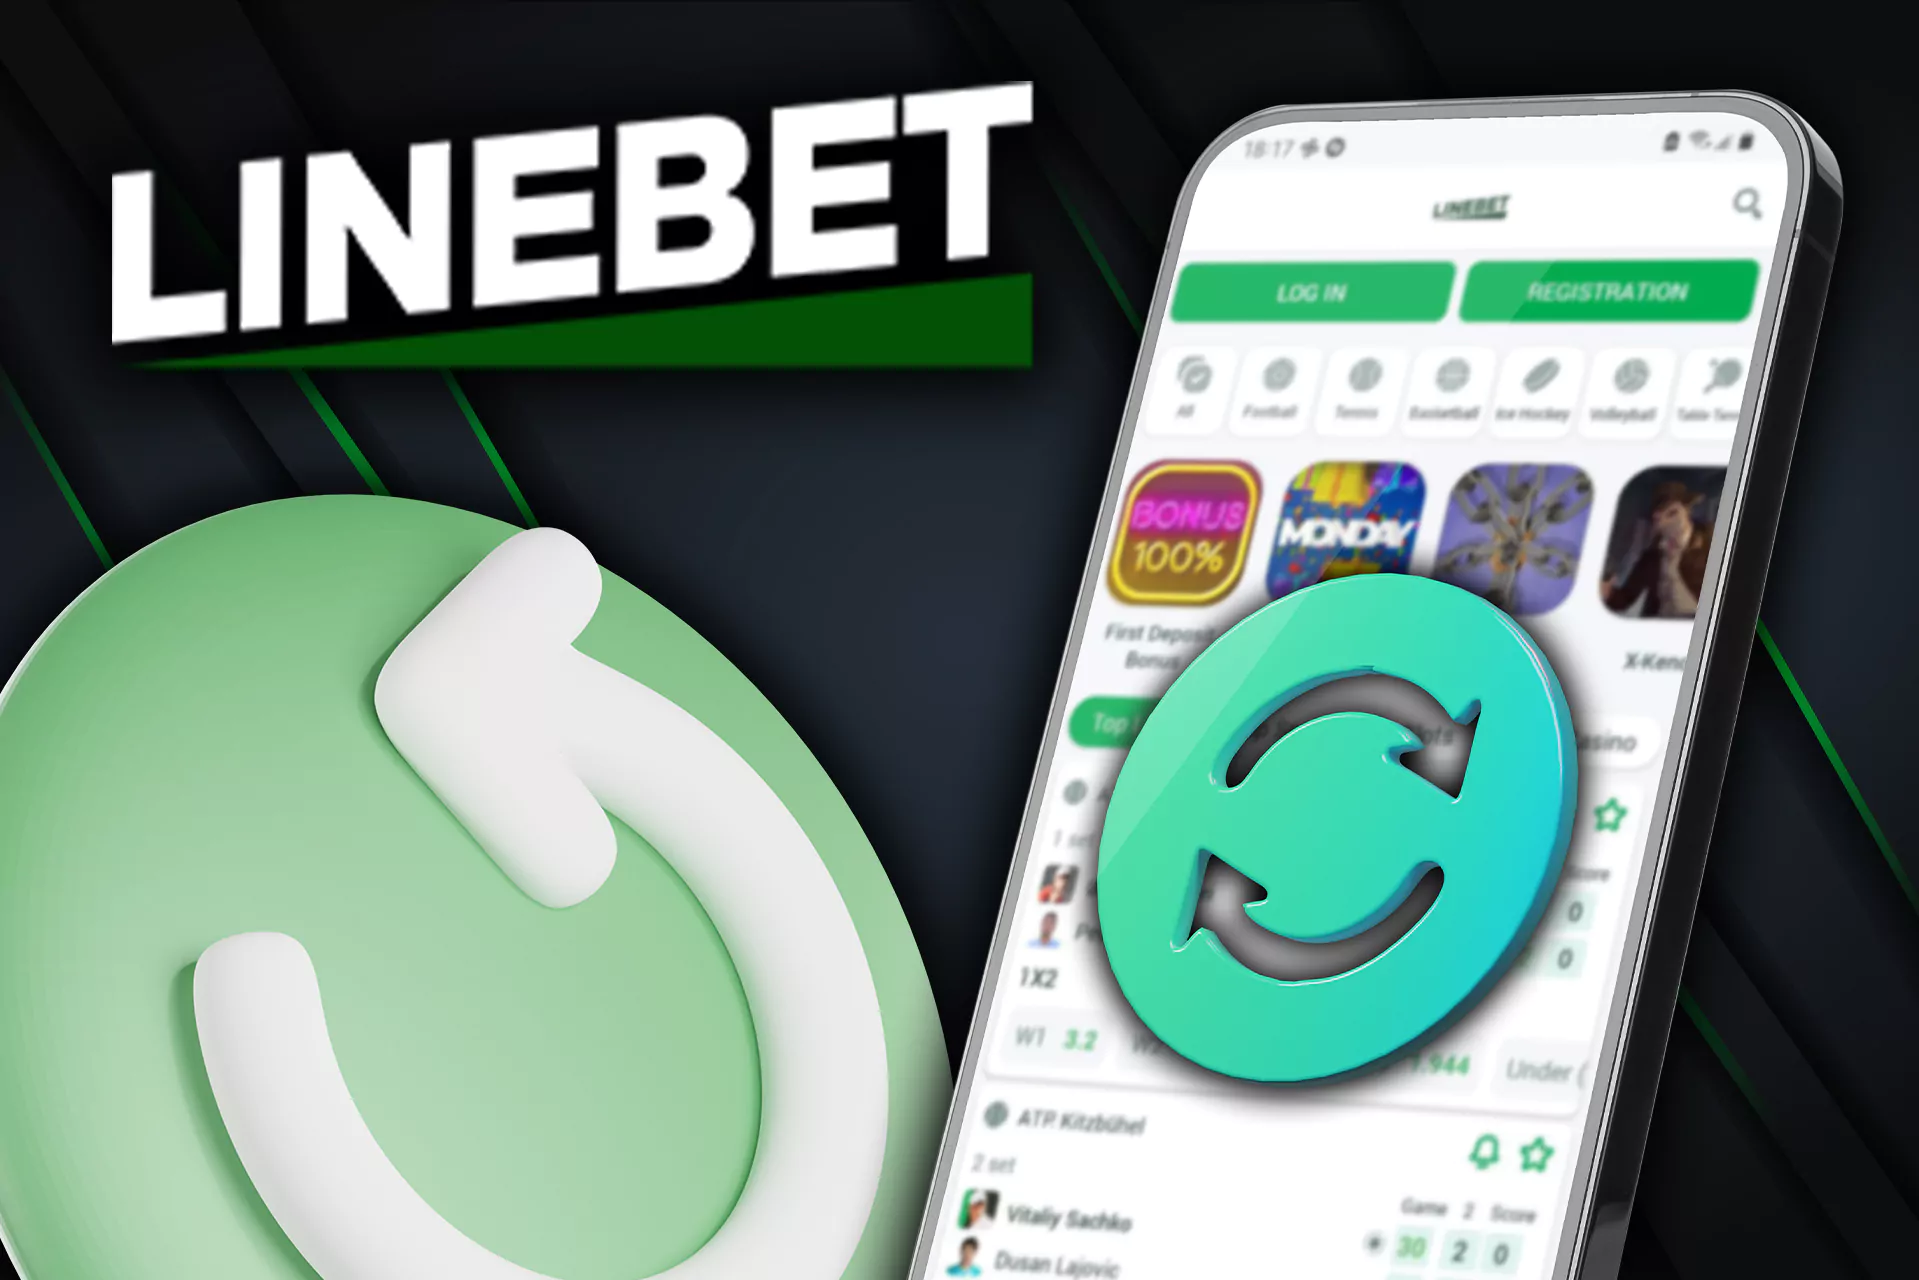 Update your Linebet app to bet without problems.